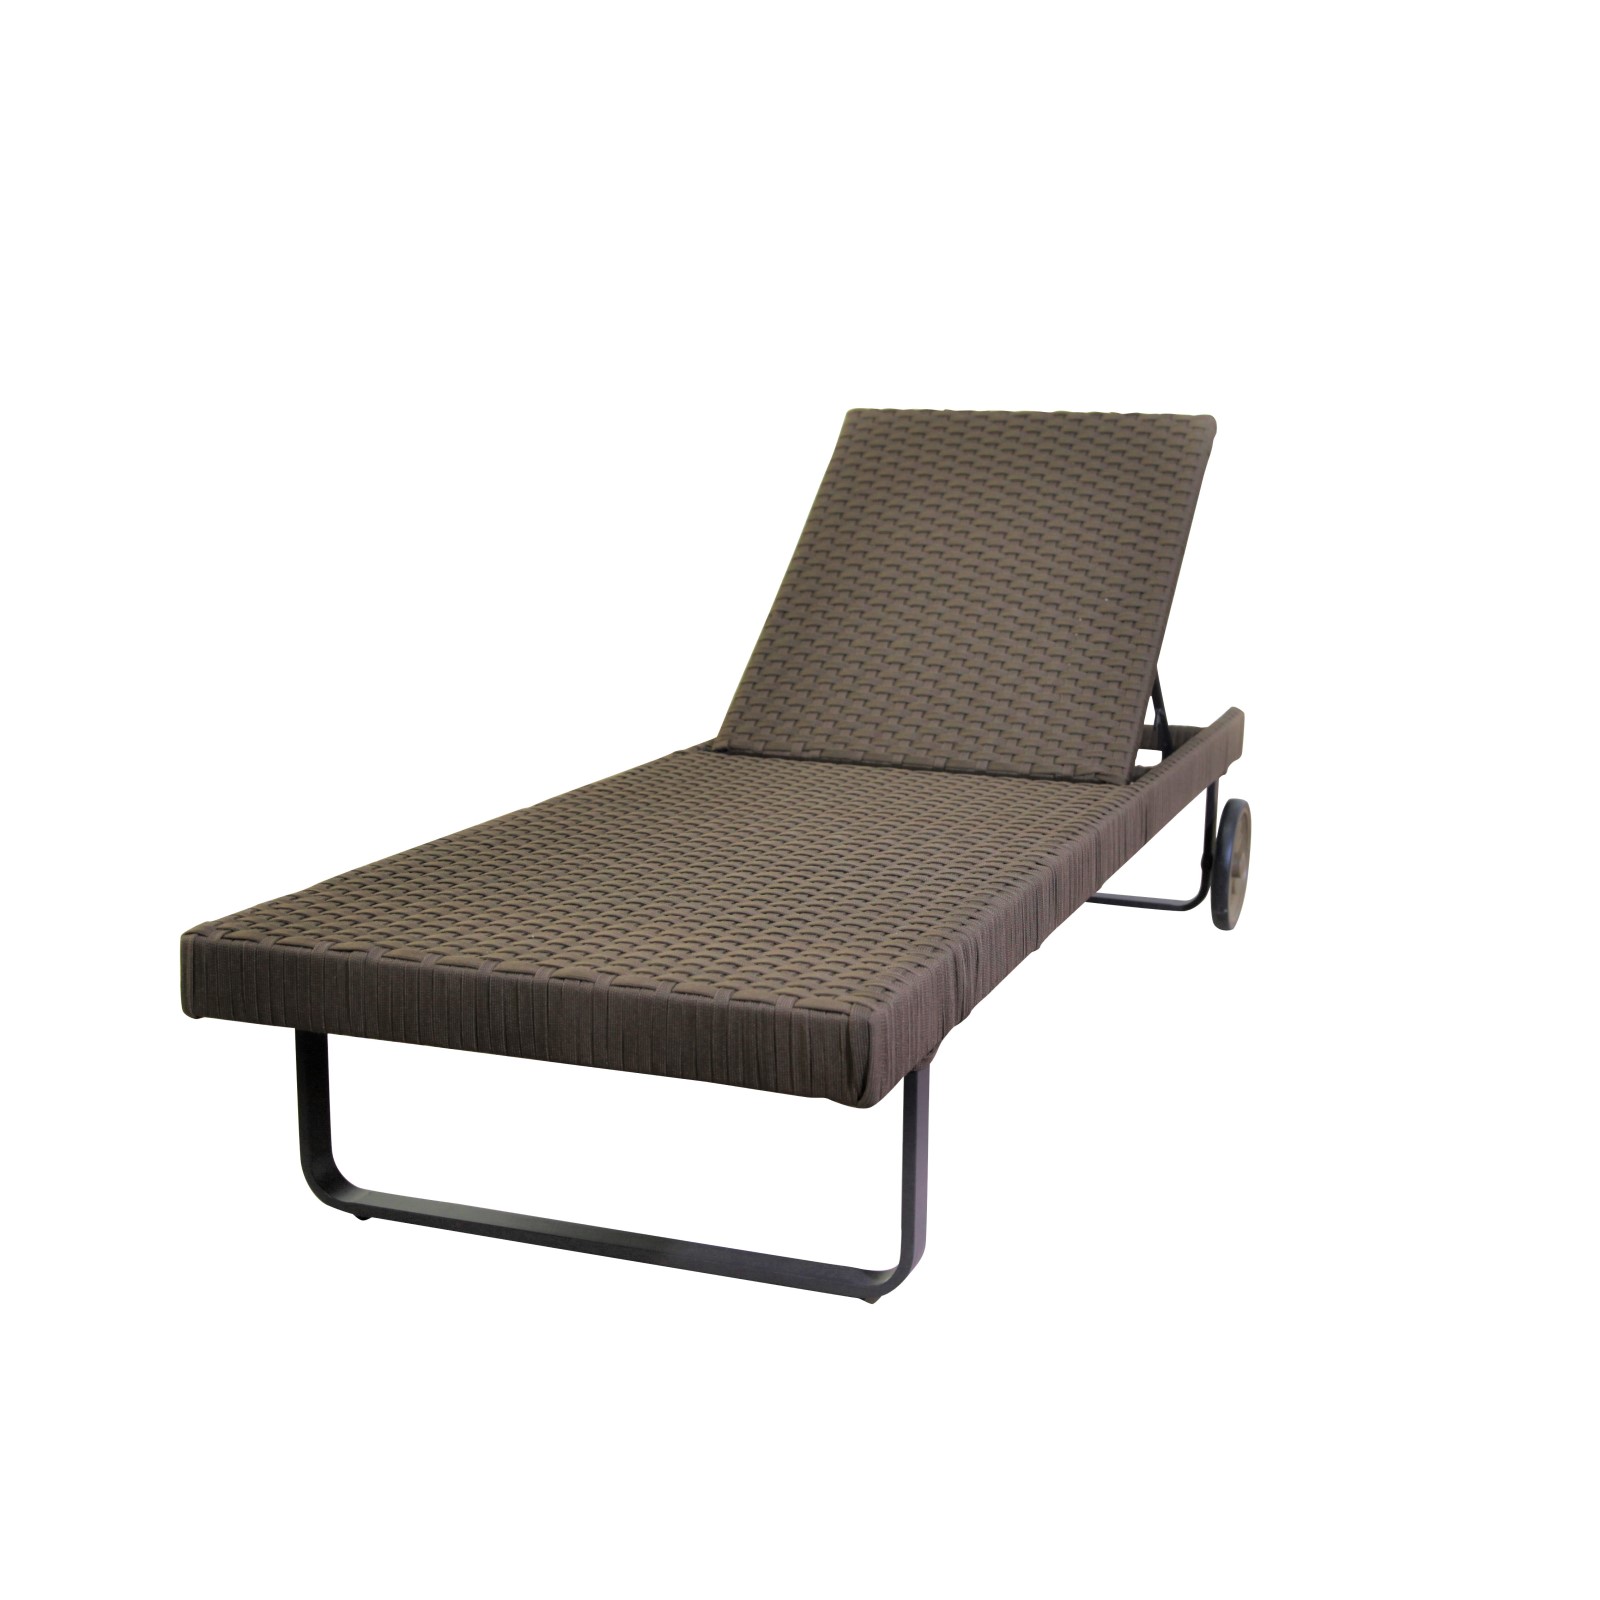 TY003 Poolside Outdoor Rope Weaving Sun Lounger Set